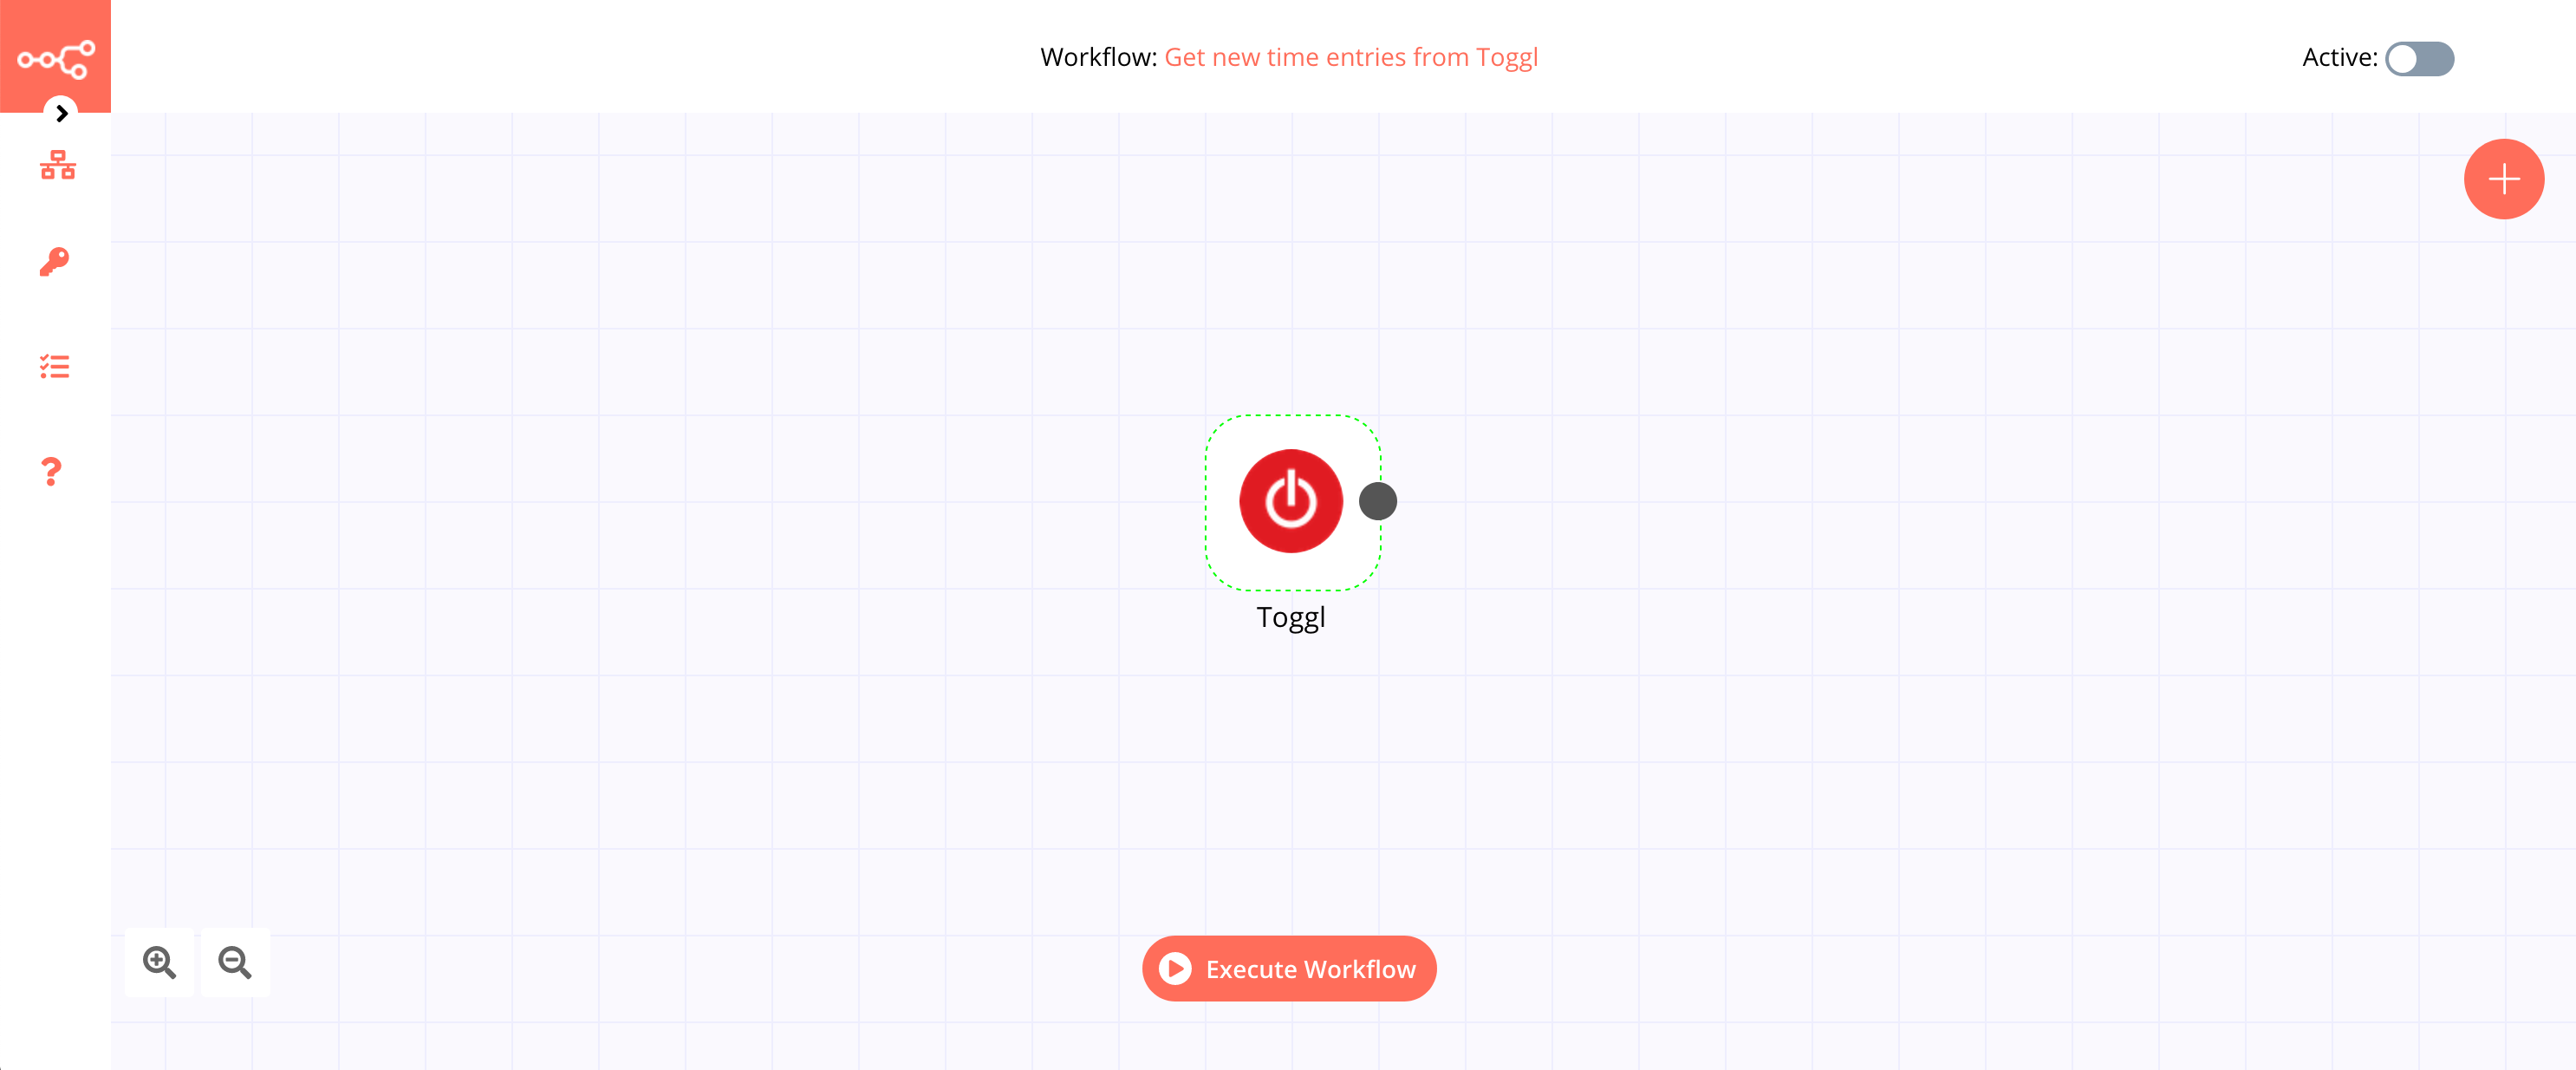 A workflow with the Toggl Trigger node